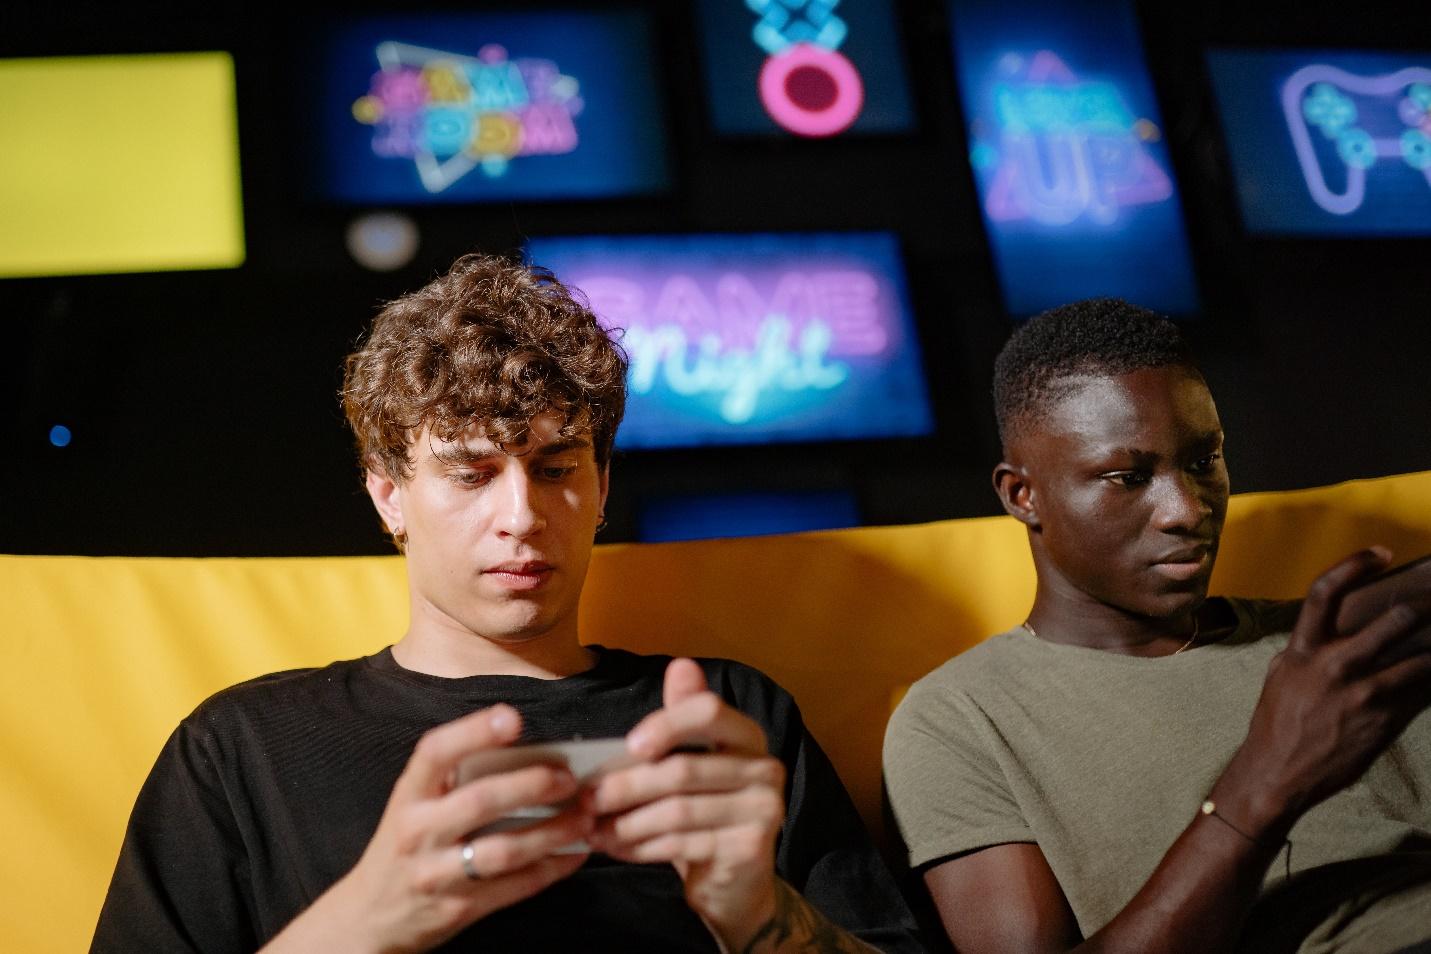 Dudes Playing a game